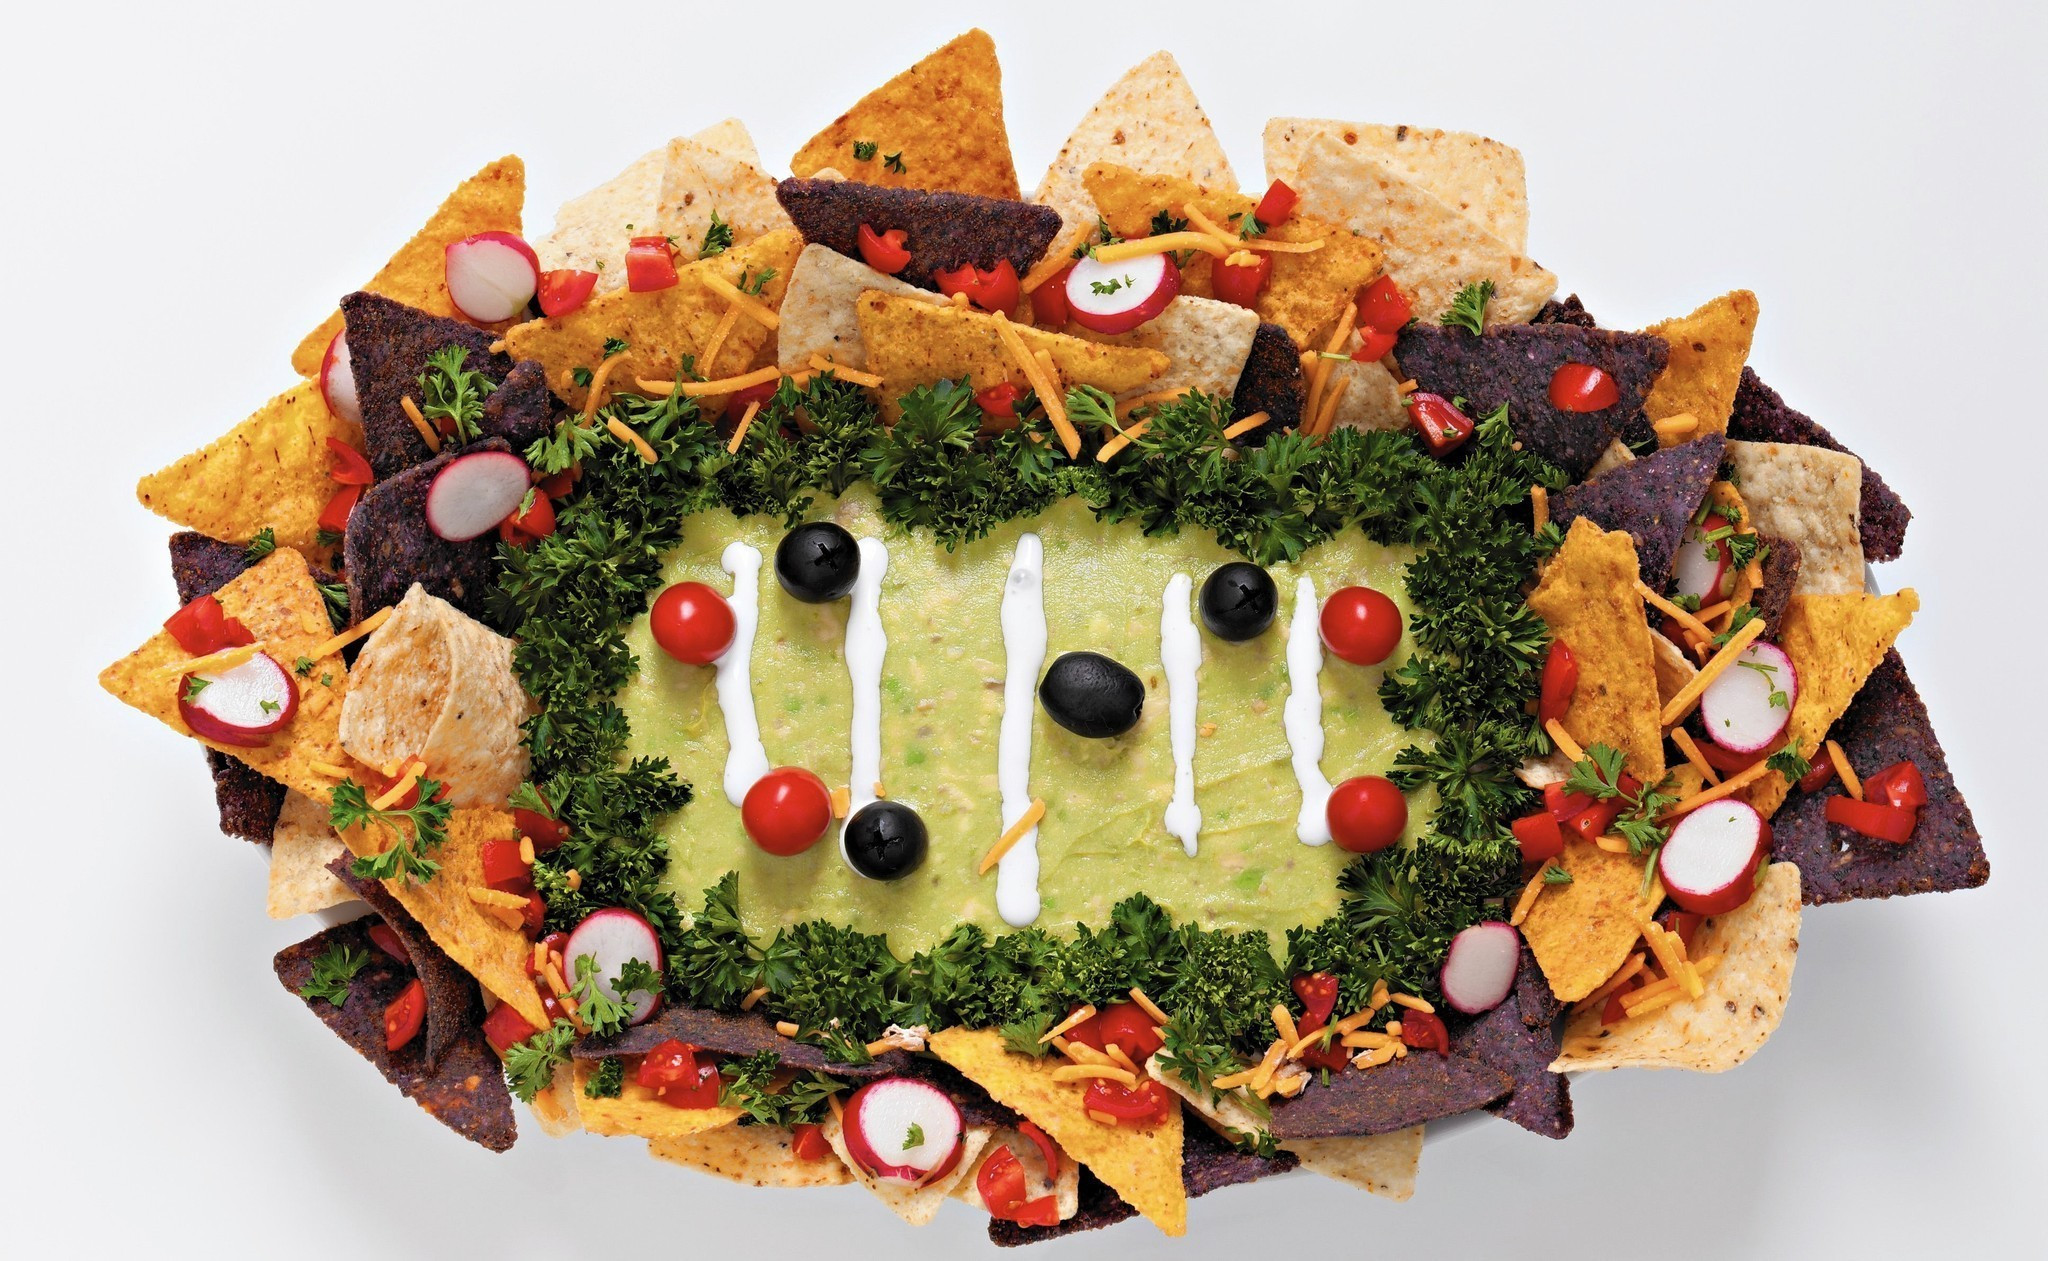 Healthy Superbowl Snacks
 Super Bowl snacks must rise above glistening cheeses